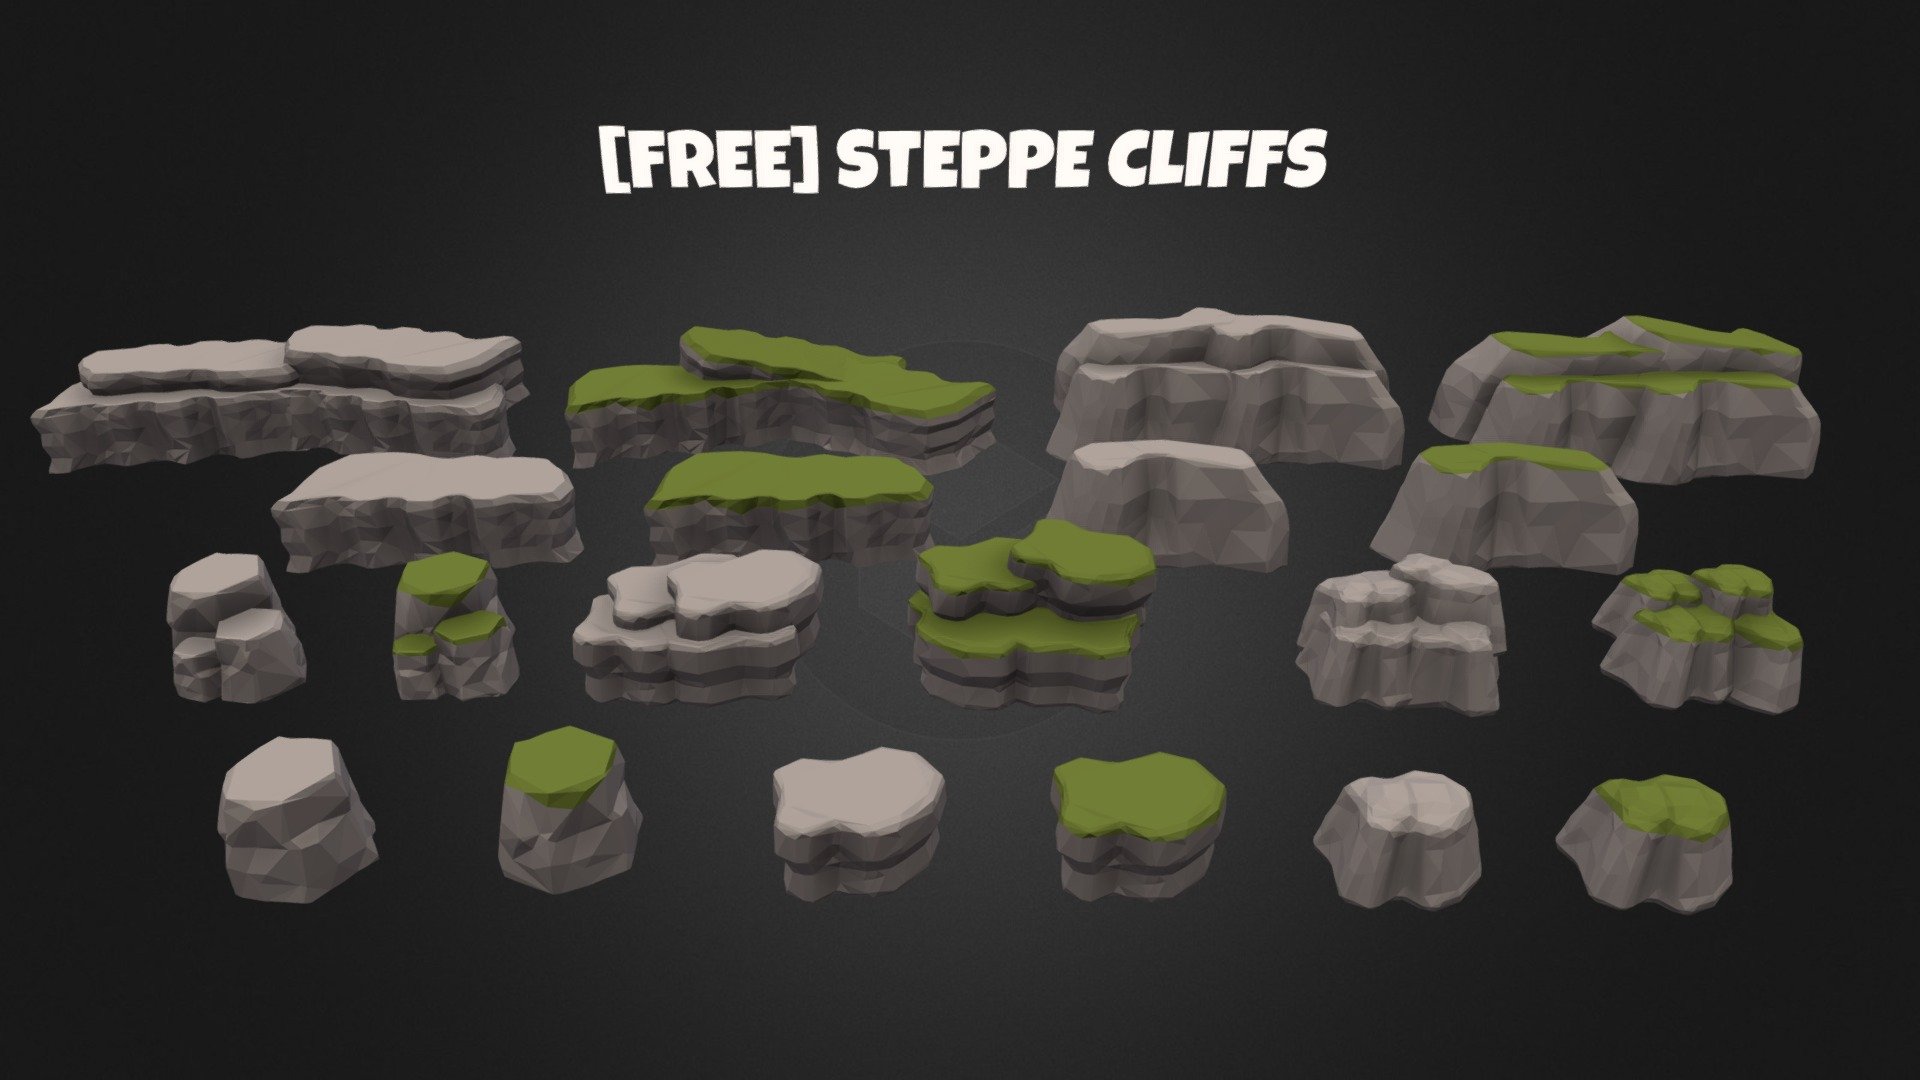 This is a small collection of cliffs to use for your projects/game enjoy!

My Youtube Channel - https://www.youtube.com/@3DArt4Games

SimplePolygon Discord - https://discord.gg/8WSpWnGH4b

Original Models / Lowpoly Models / Game ready Props

[Licence] Not to resell model, can sell commercially in end project/game

If you want to distribute (free) or use them in anyway that others can see please credit myself below you can copy and paste it.



Models Created by SimplePolygon

Sketchfab: https://sketchfab.com/SimplePolygon

SimplePolygon Discord: https://discord.gg/BT6CeZcCWh 



If you have any further questions I will be happy to answer 3d model